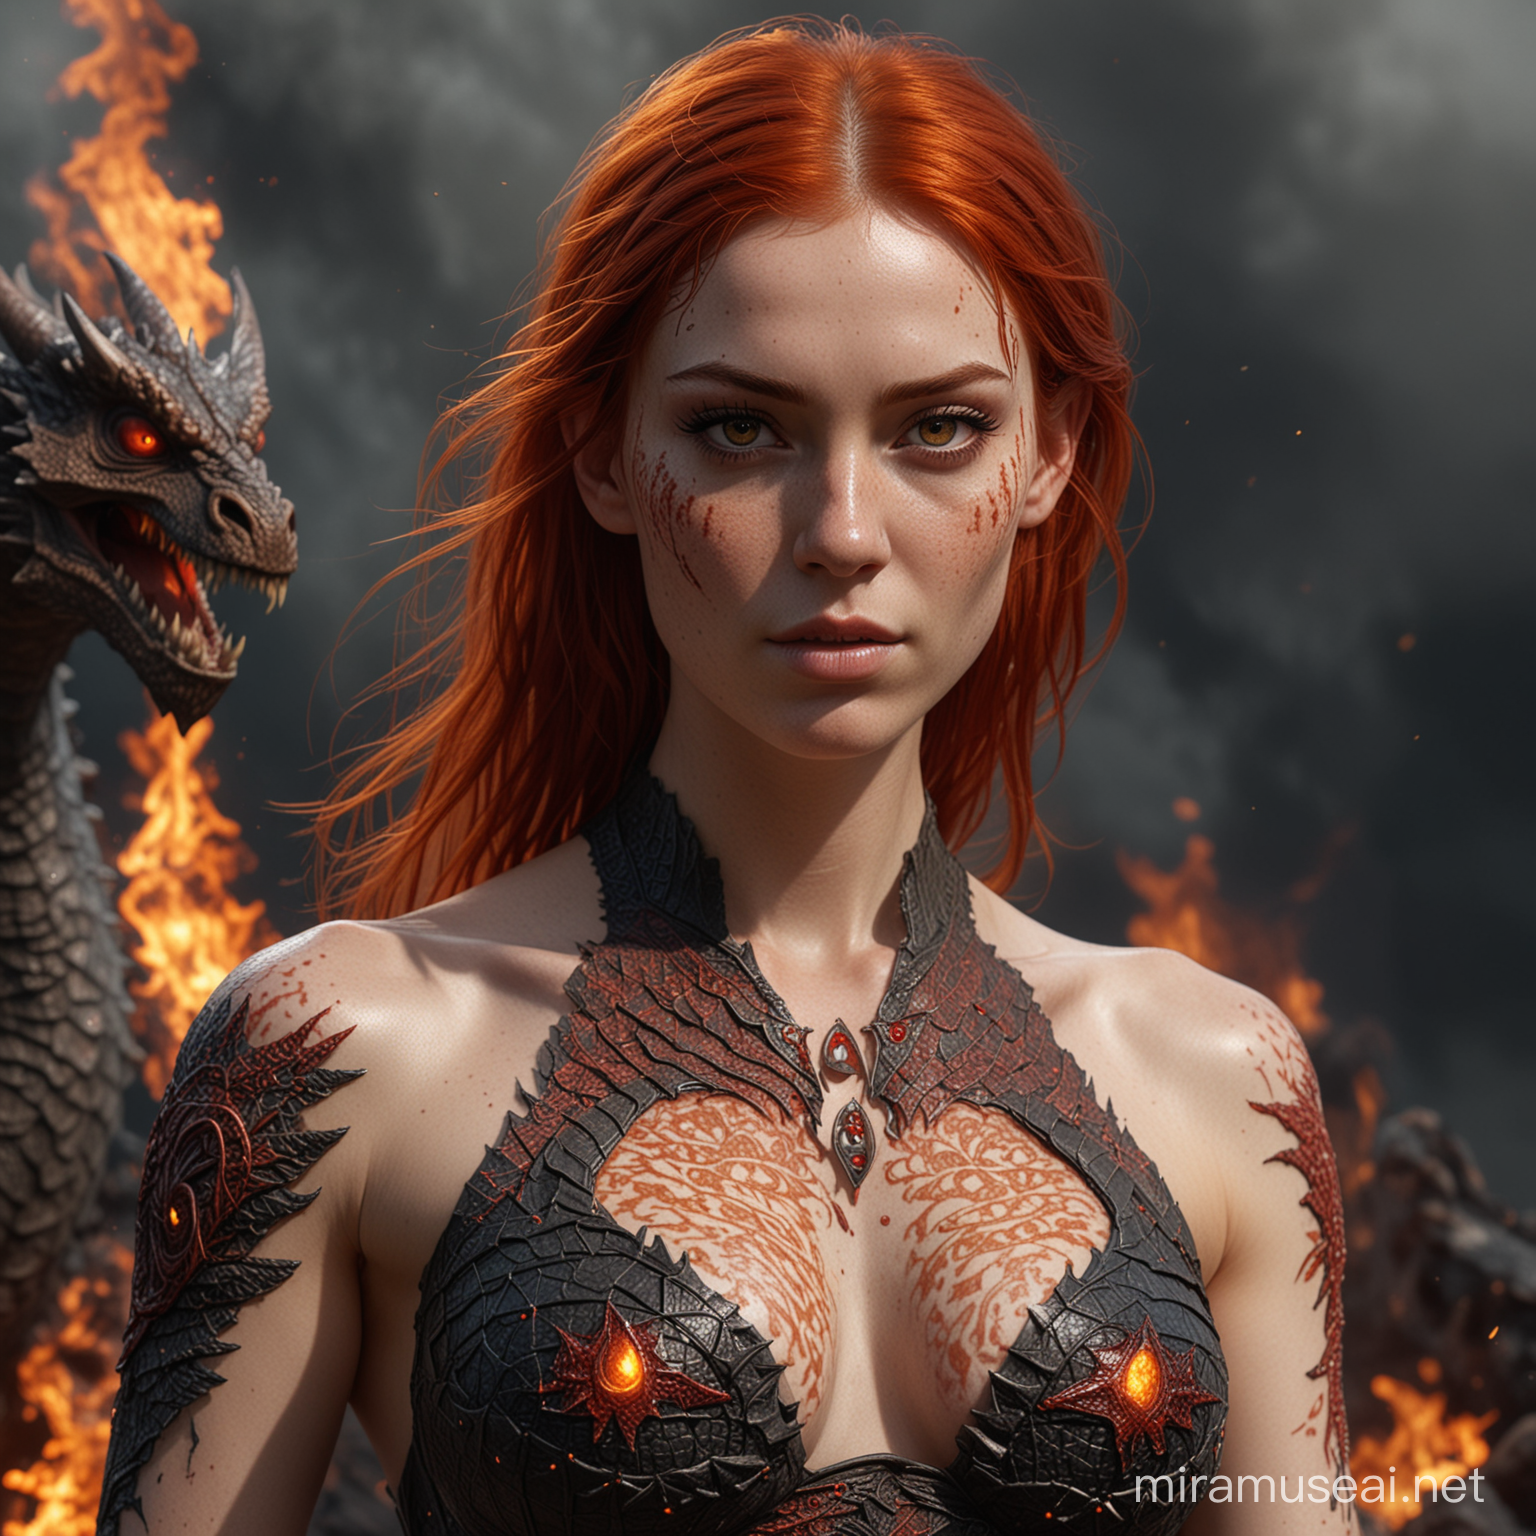 Fiery RedHaired Woman with Draconic Tattoos in Dragon Scale Top